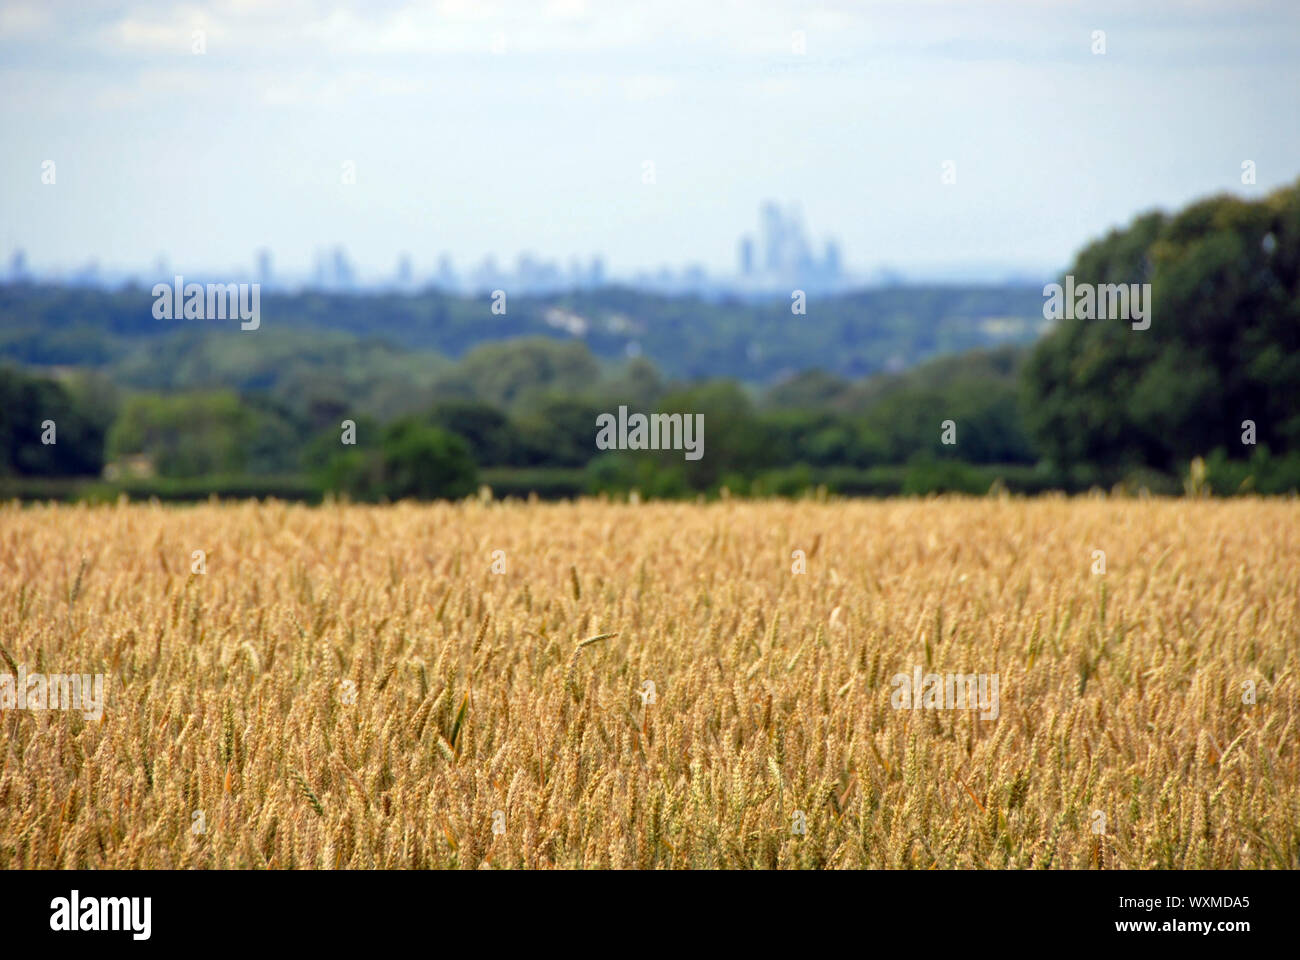 London from the North Downs at Reigate, Surrey. London skyline with fields. London is surrounded by a green belt of woods and fields. Focus on field. Stock Photo